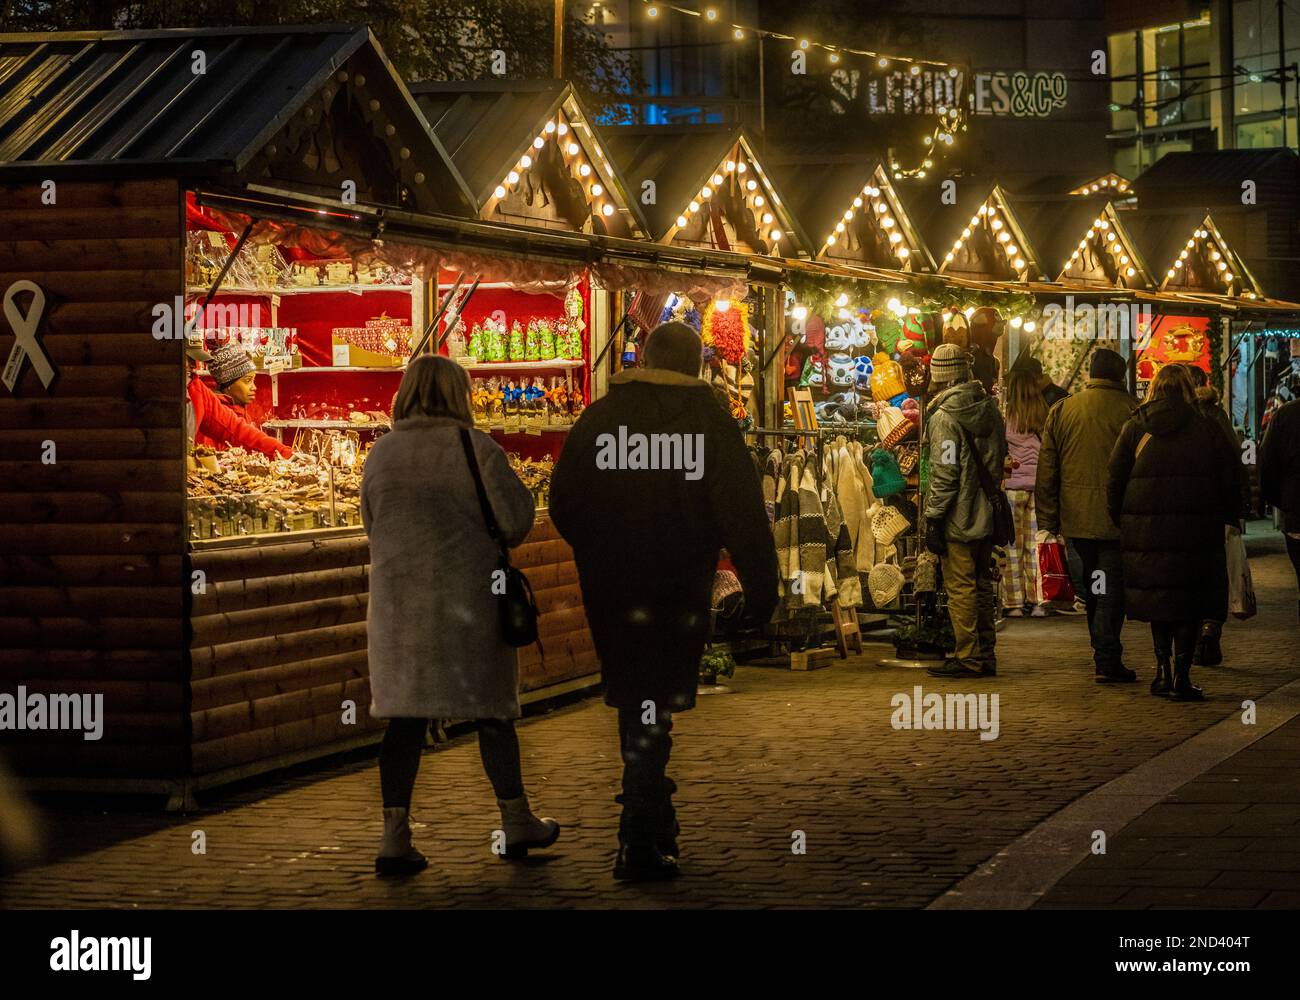 Wooden alpine chalet type stalls in front of Selfridges in Exchanger Square at night.  Manchester Christmas Markets. Manchester. UK Stock Photo